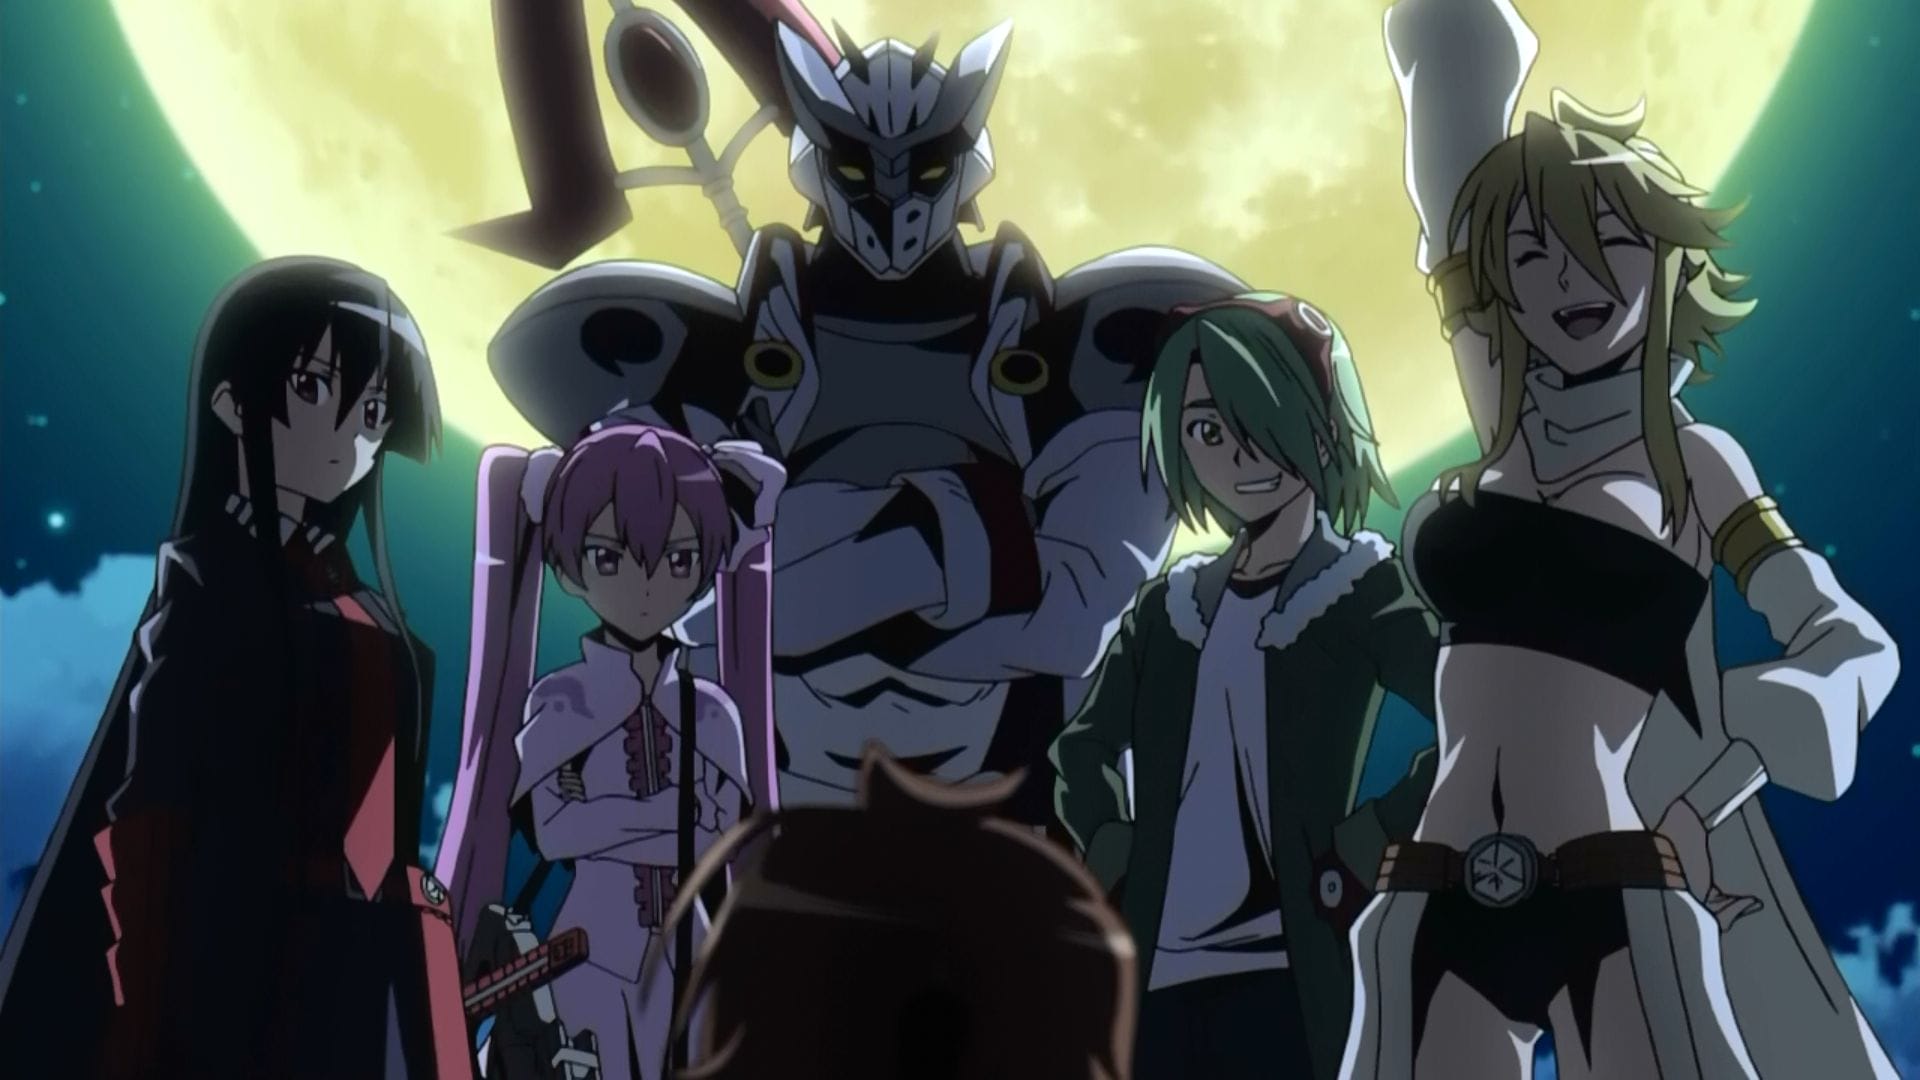 Akame Ga Kill - Which is your favourite character?